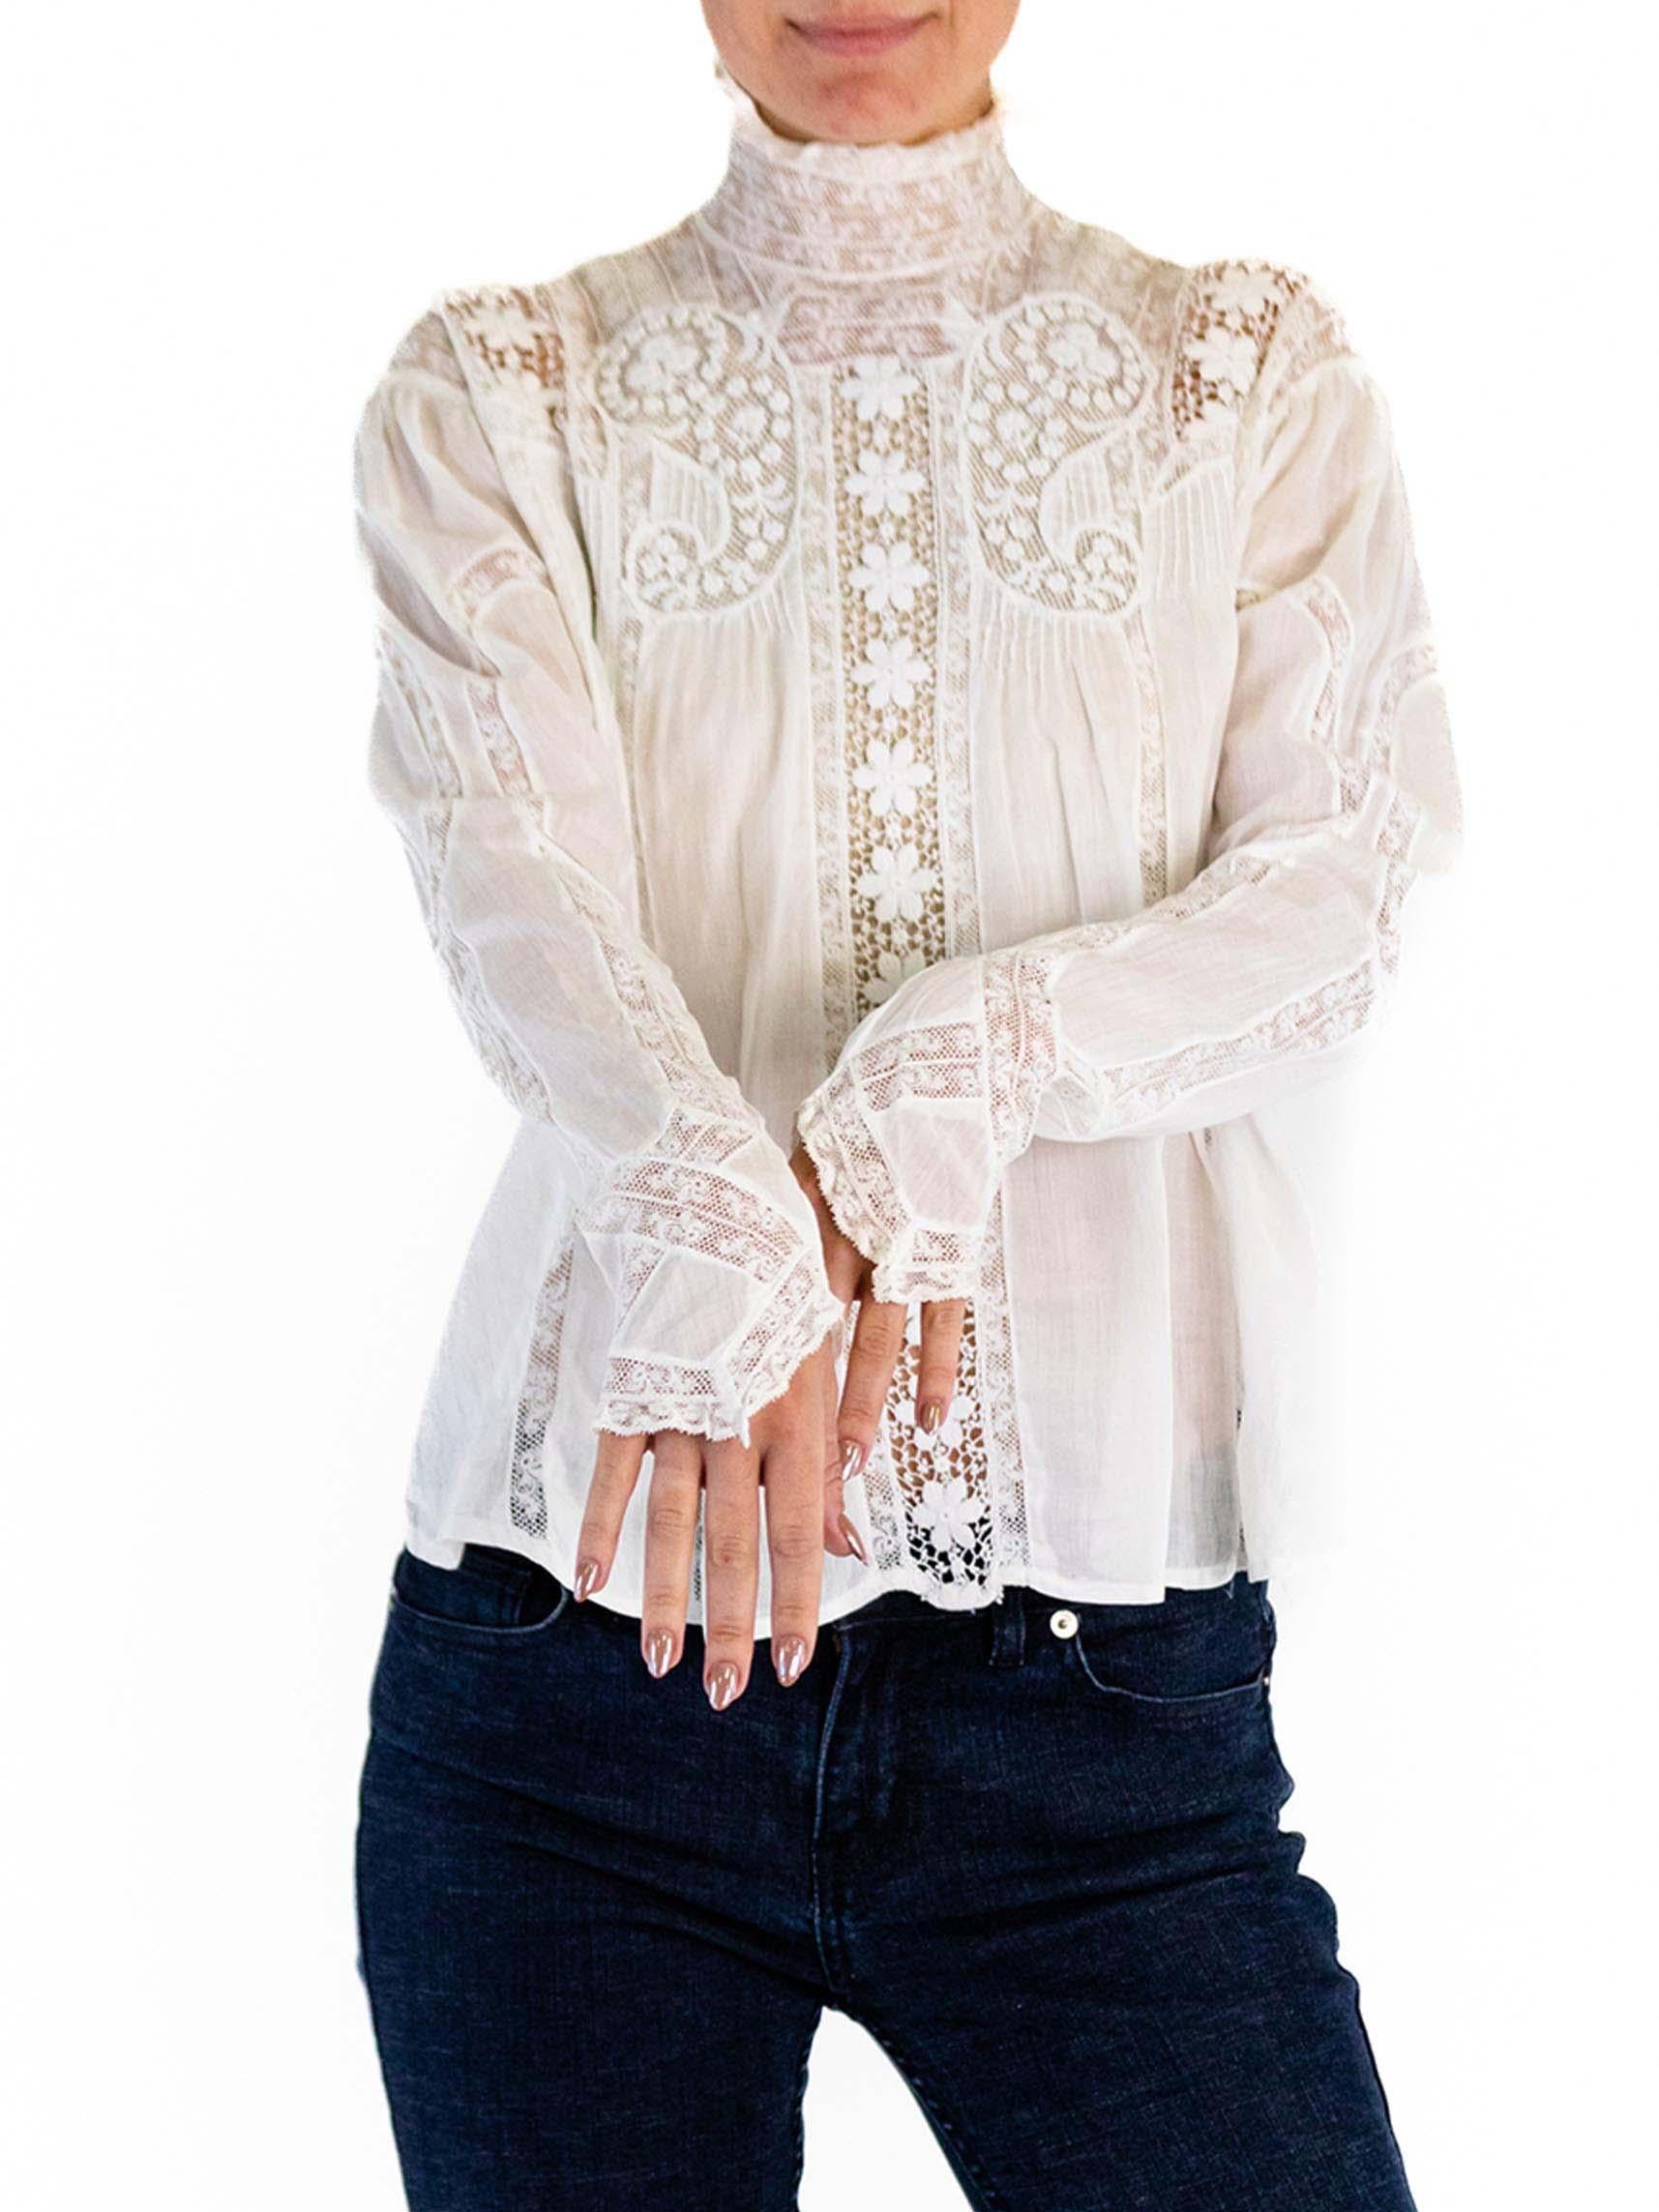 Victorian White Organic Cotton Voile & Lace Swan Neck Blouse For Sale 5